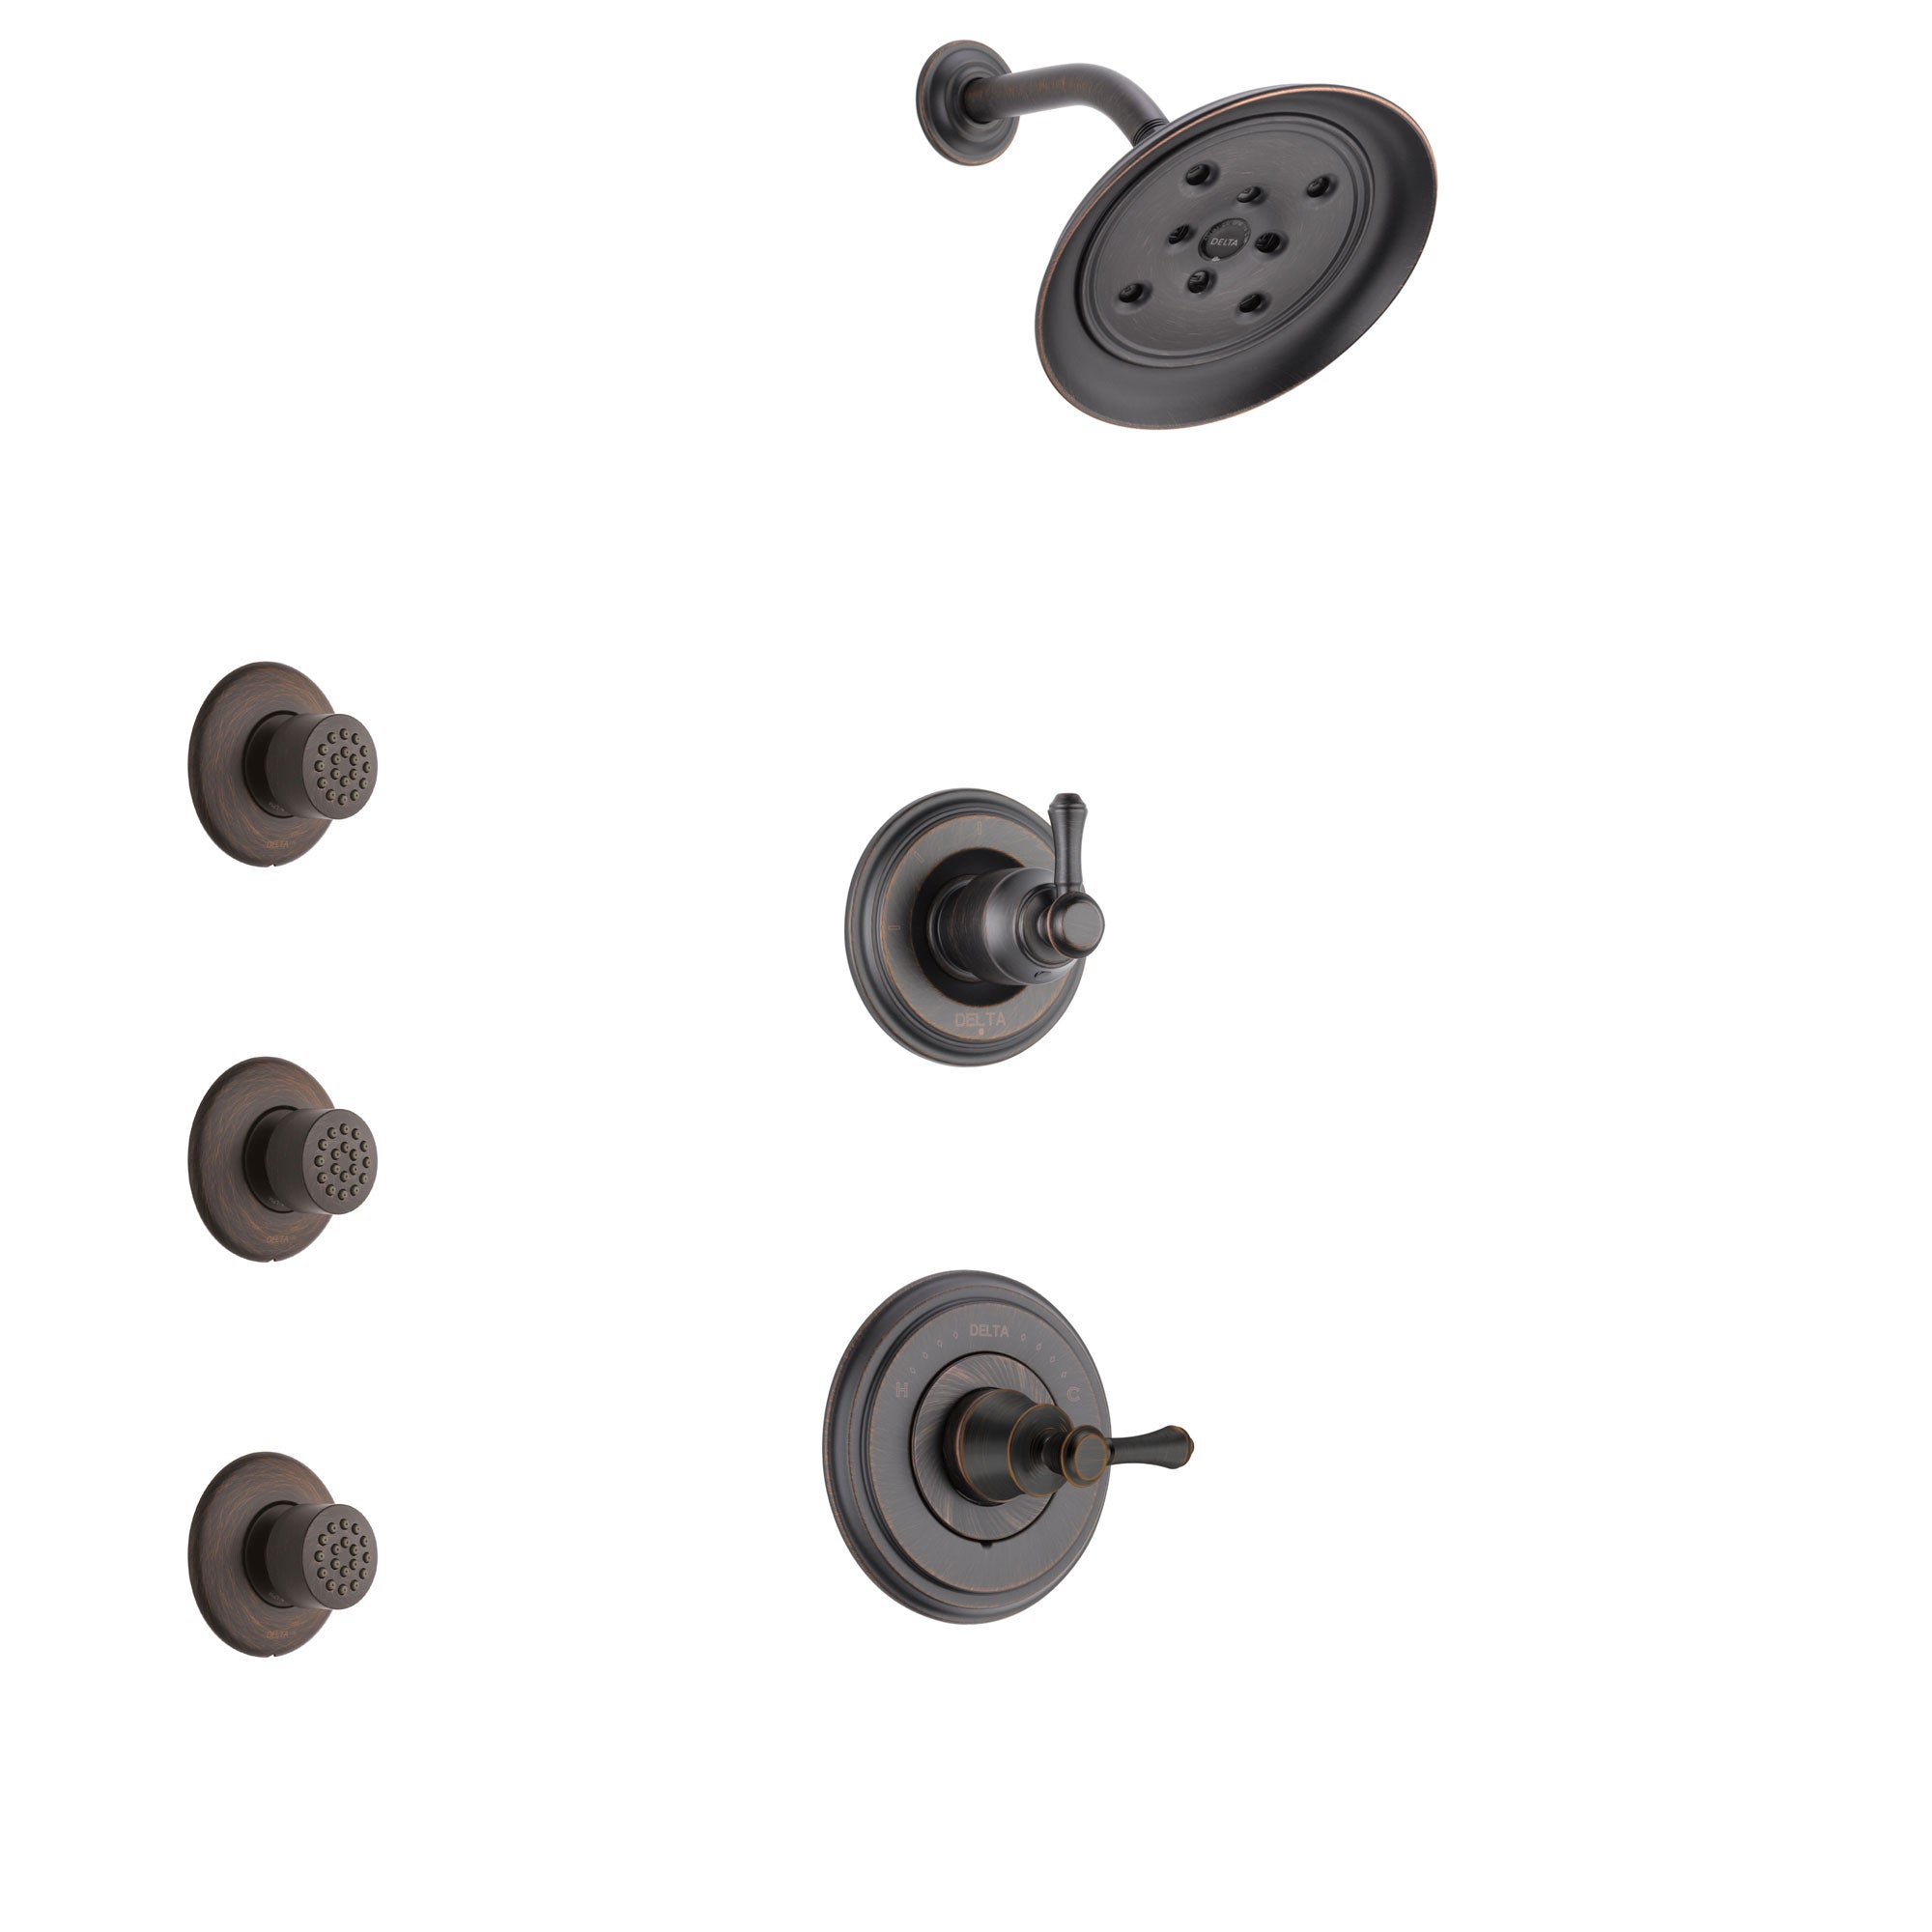 Delta Cassidy Venetian Bronze Finish Shower System with Control Handle, 3-Setting Diverter, Showerhead, and 3 Body Sprays SS14973RB3